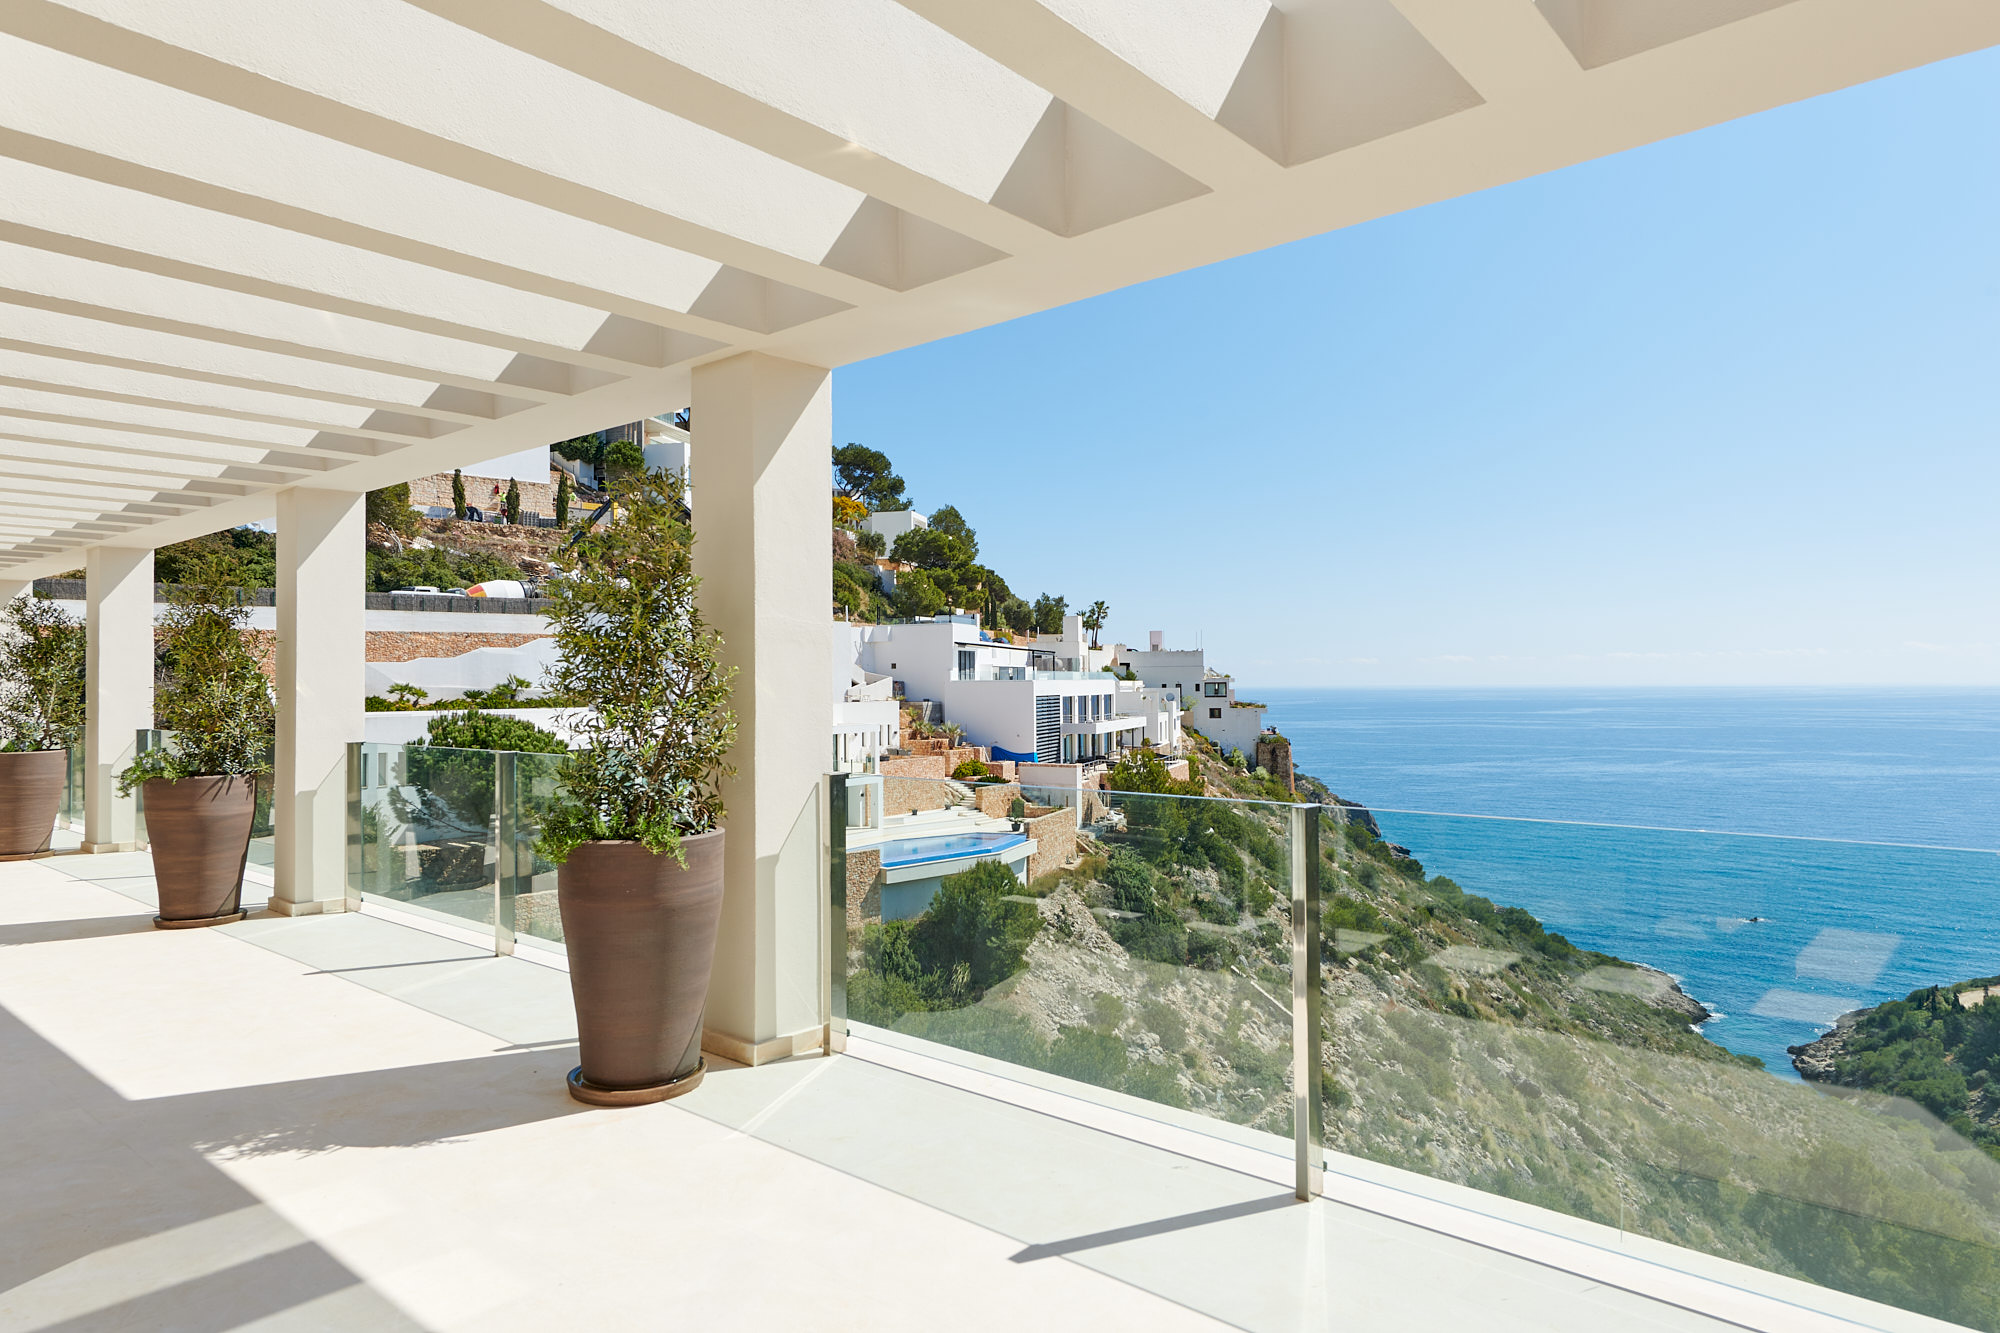 View out to sea from the terrace of a private villa in Ibiza